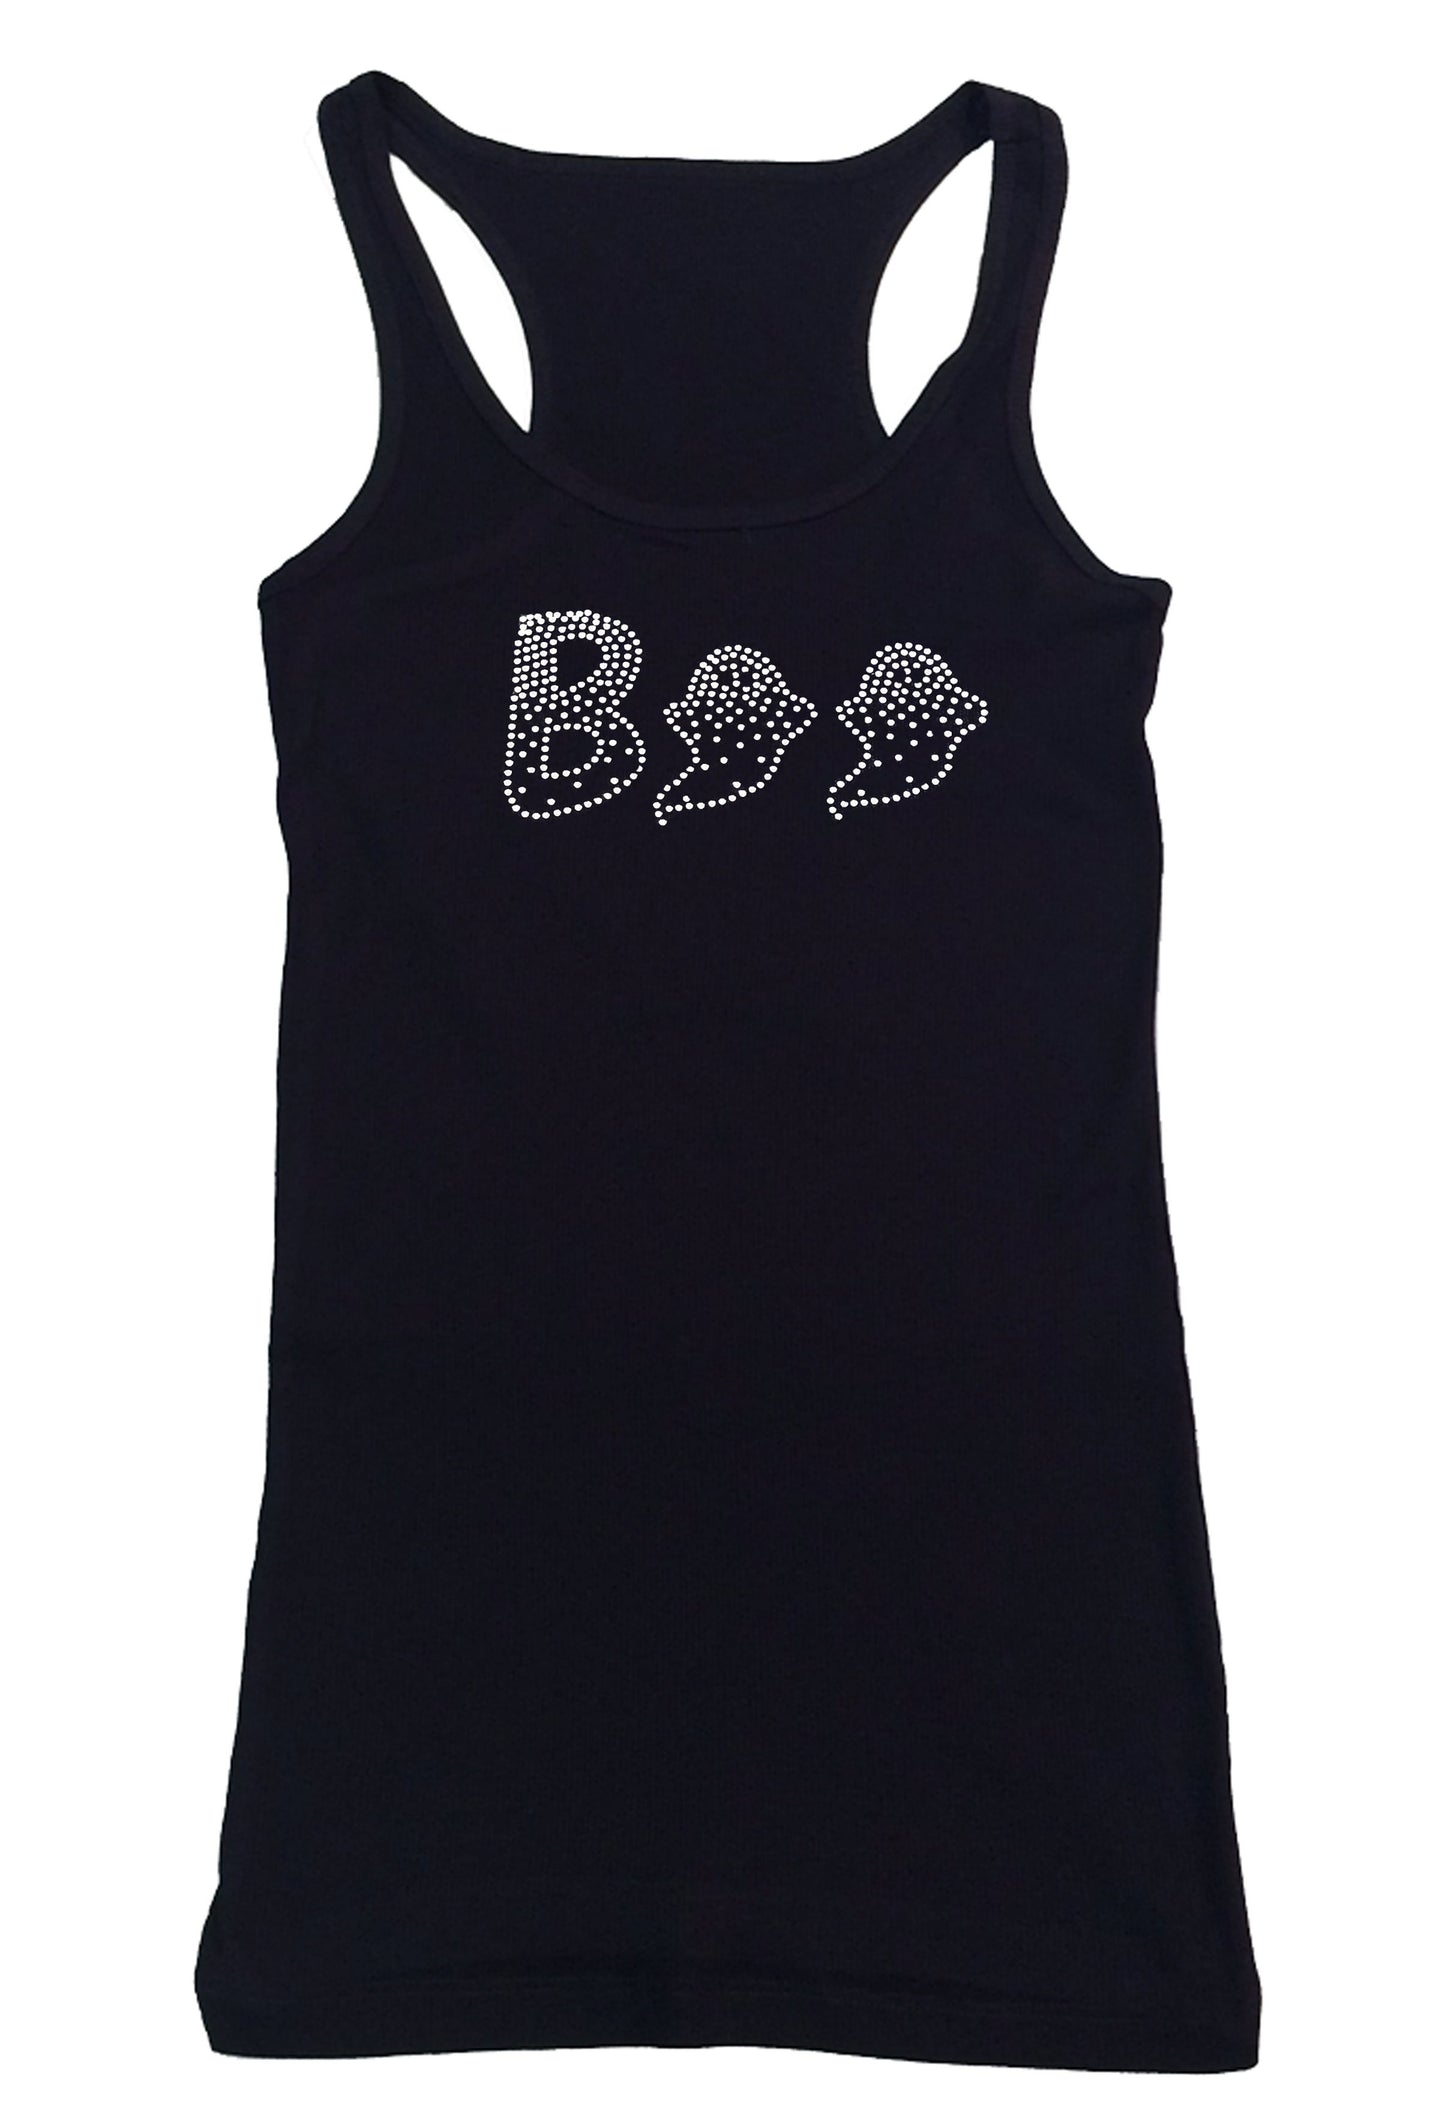 Womens T-shirt with Boo Ghost Halloween in Rhinestones